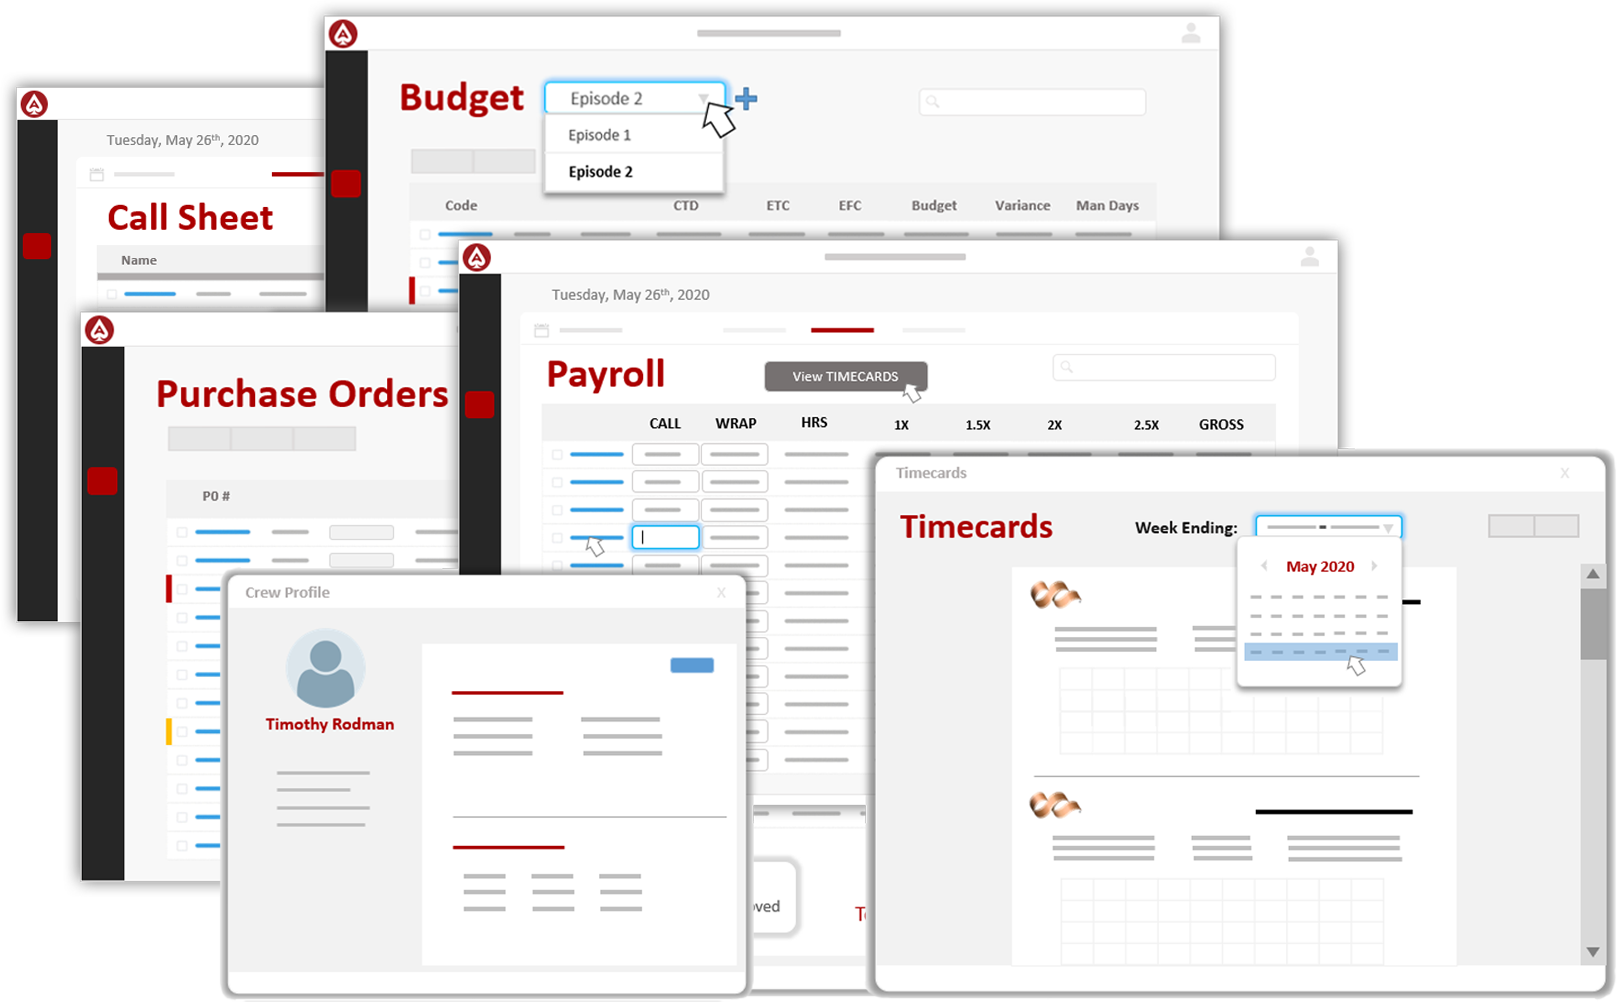 Call Sheet, Budget, Purchase Orders, Payroll, Timecards